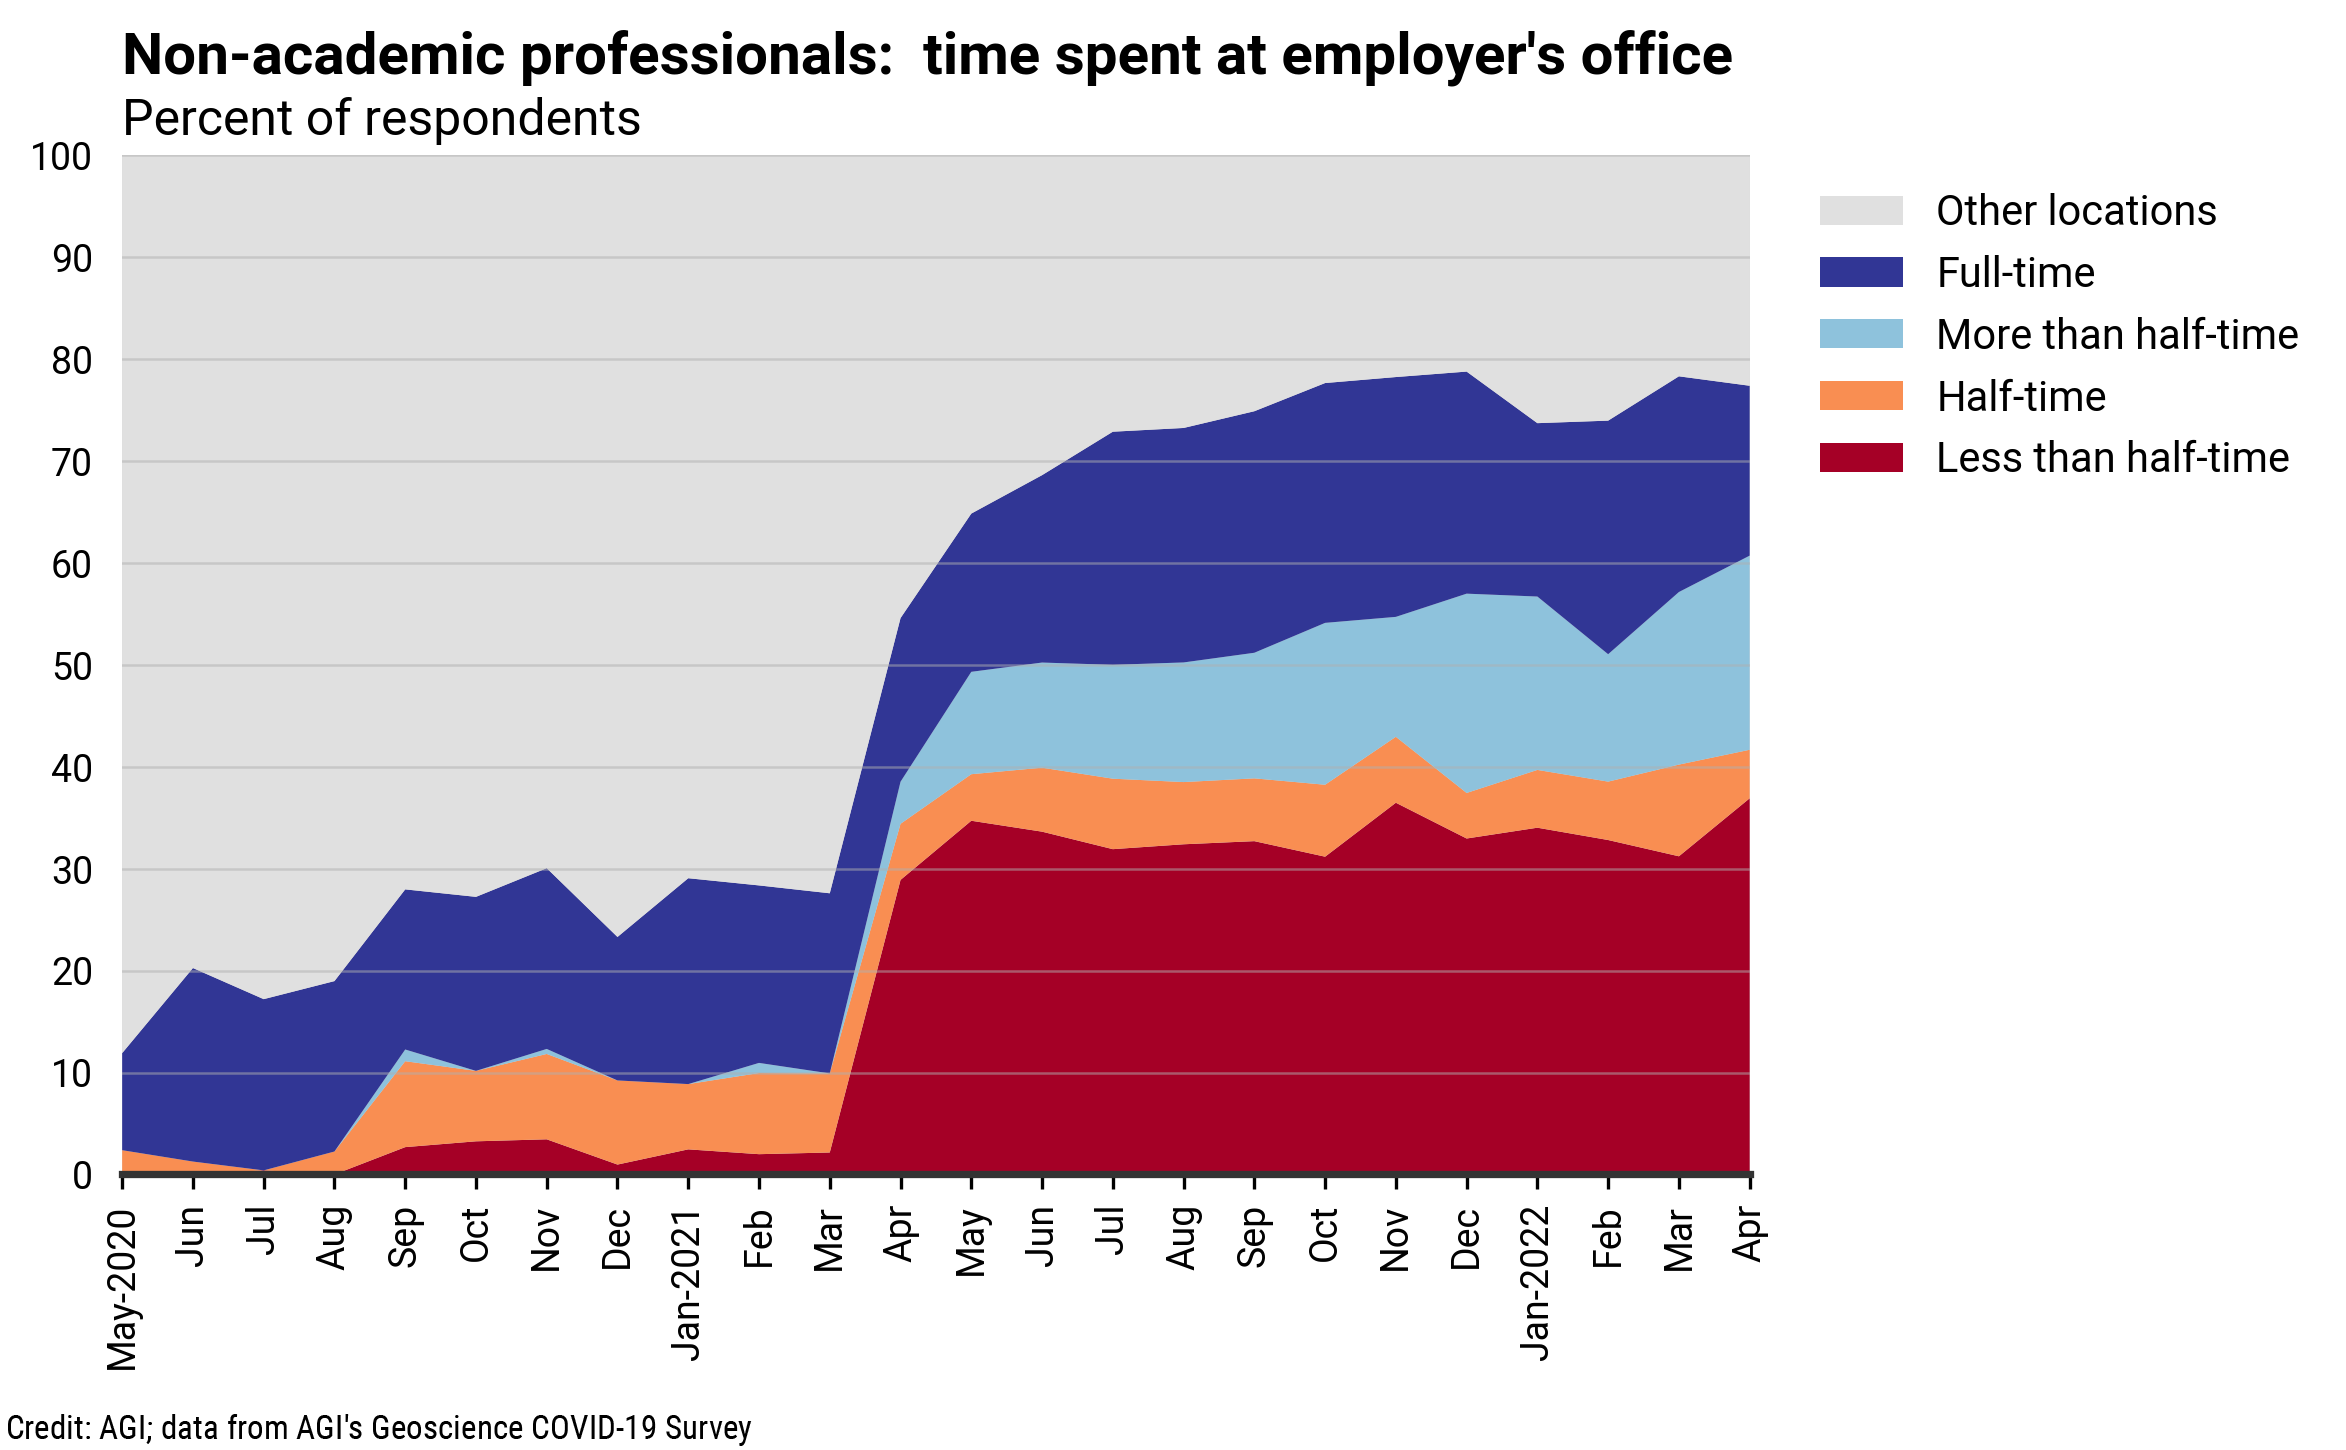 DB_2022-006 chart 06: Non-academic professionals: time spent at employer&#039;s office (Credit: AGI; data from AGI&#039;s Geoscience COVID-19 Survey)